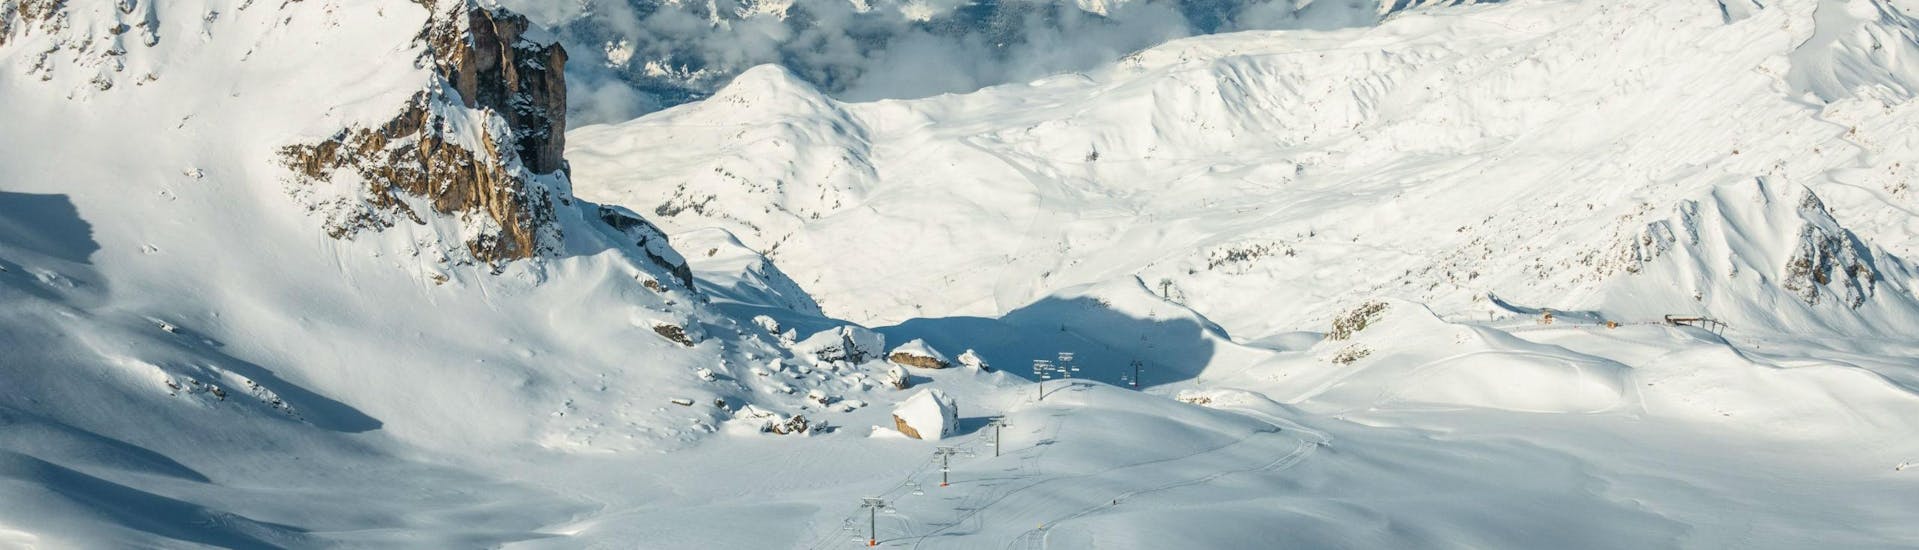 A panoramic view of the ski slopes of La Plagne, a popular ski resort in the French Alps, where local ski schools ski lessons for everyone who wants to learn to ski.